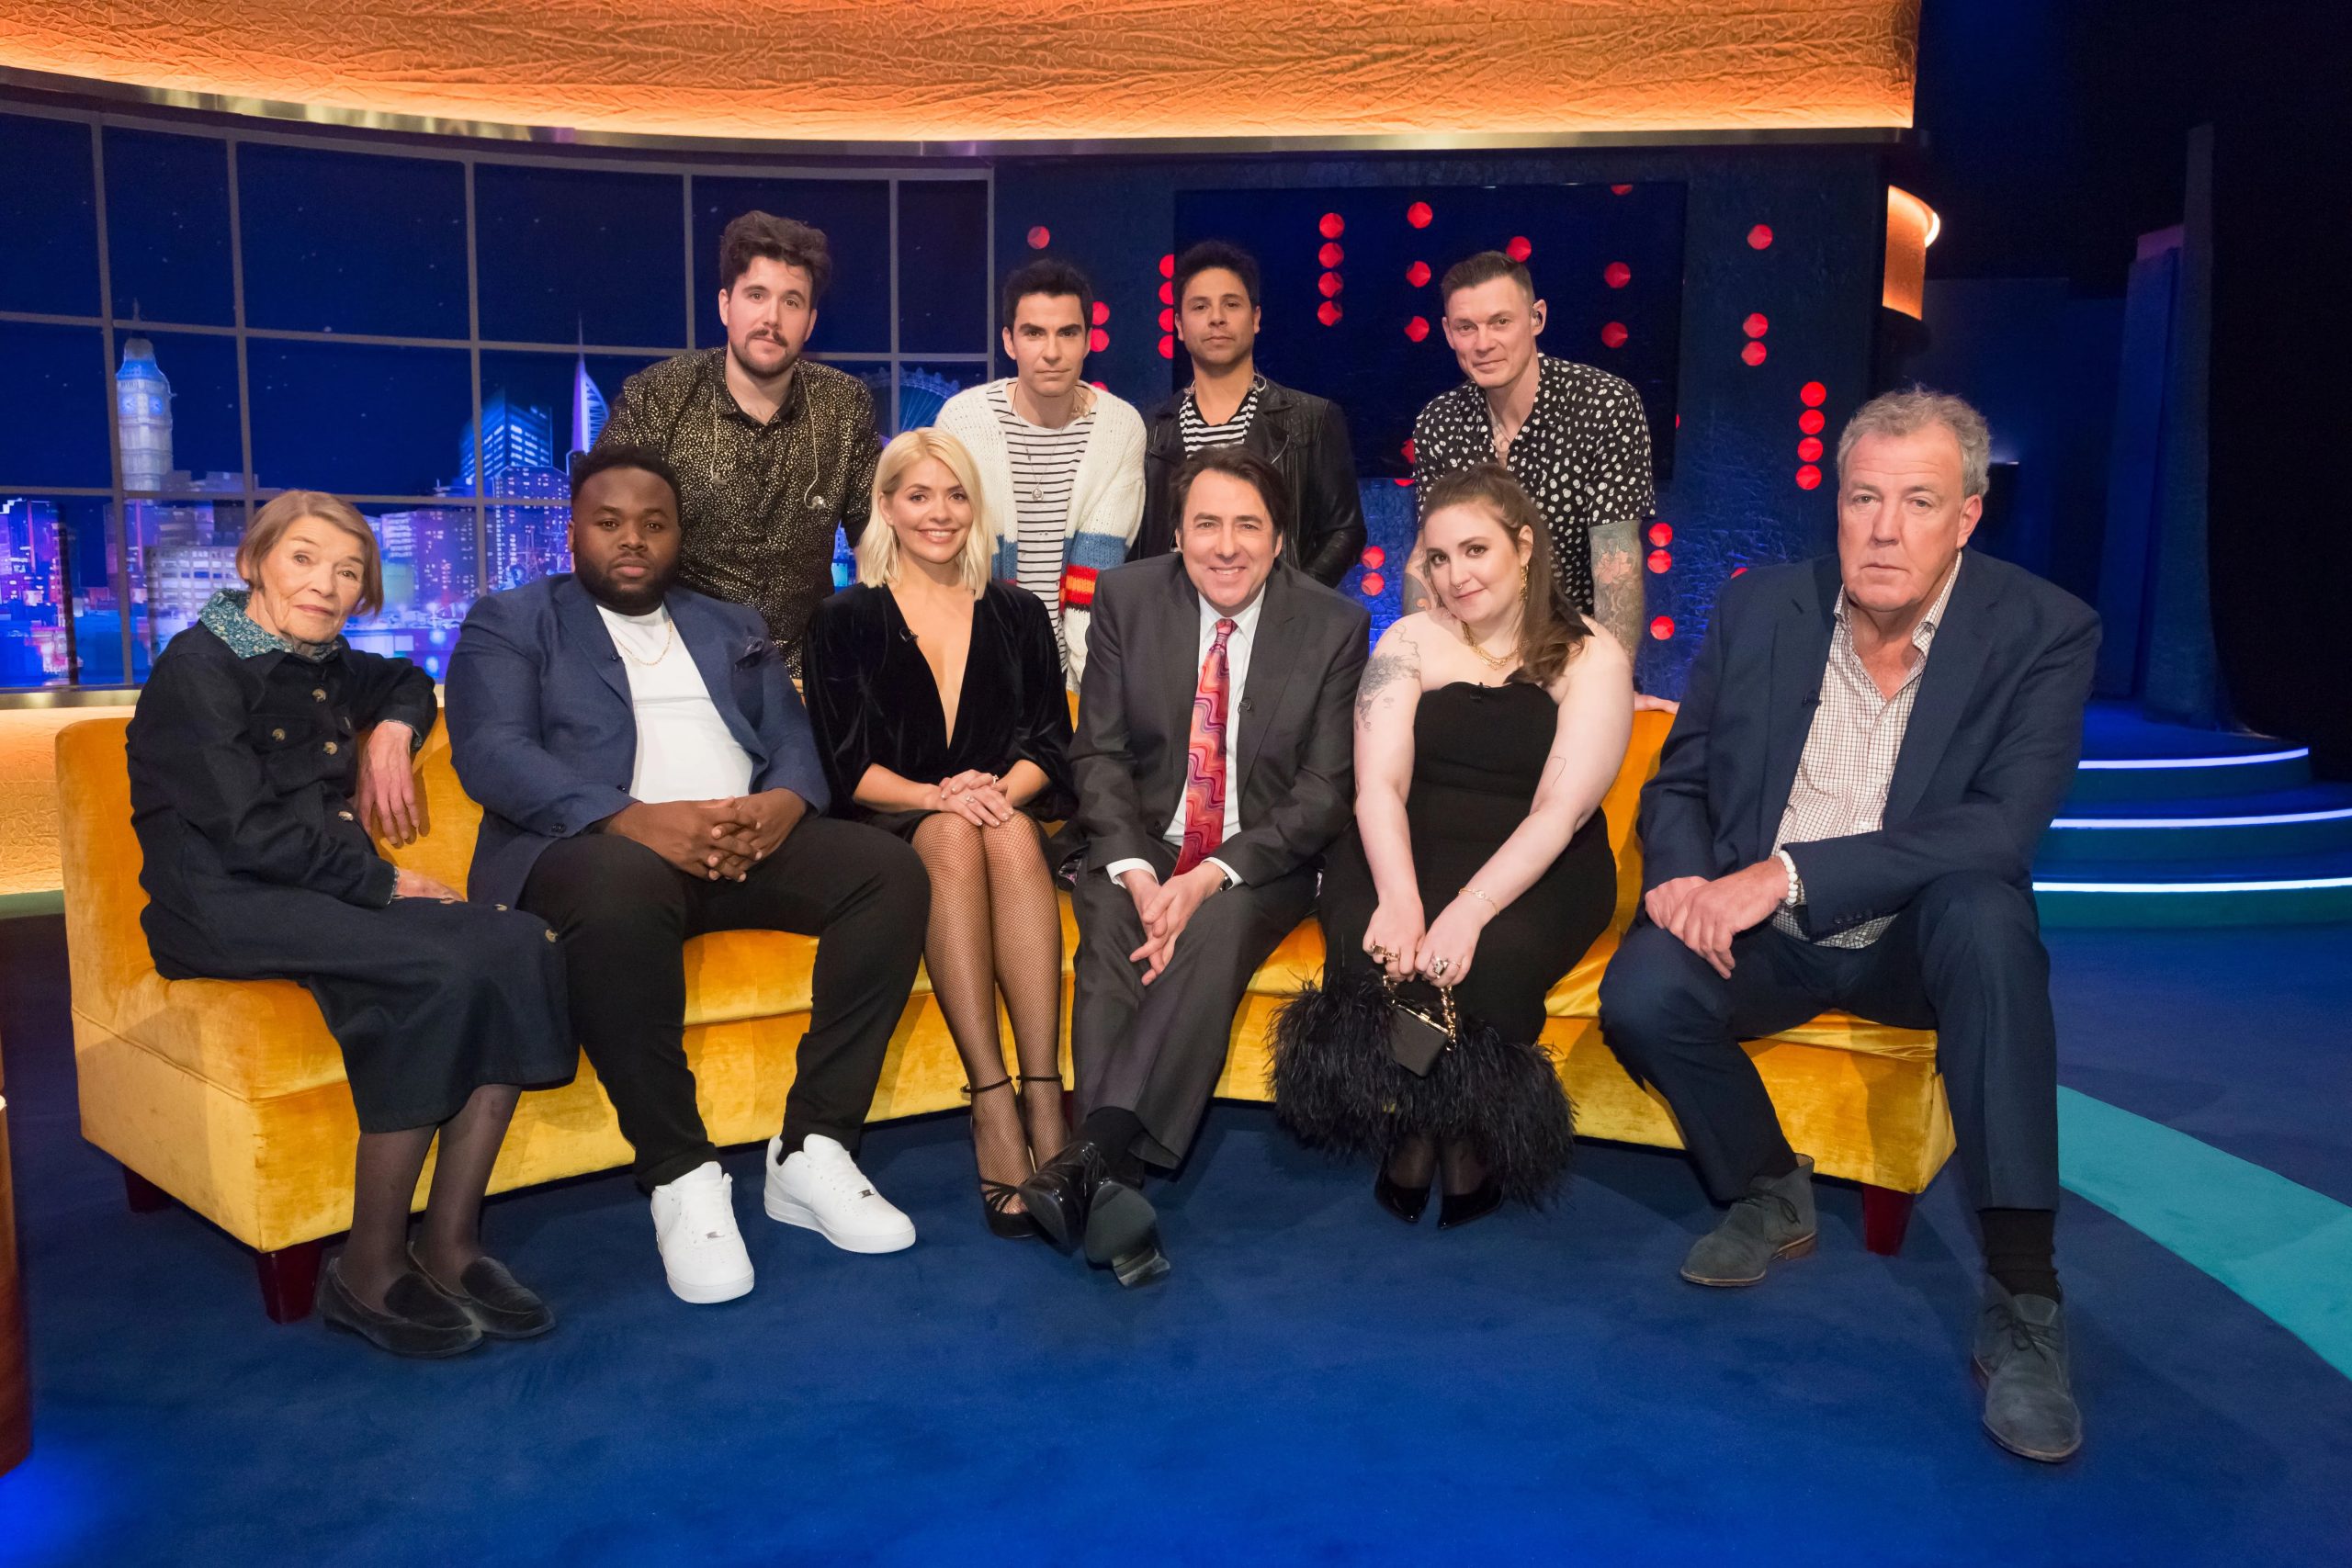 Who is on The Jonathan Ross Show this series?